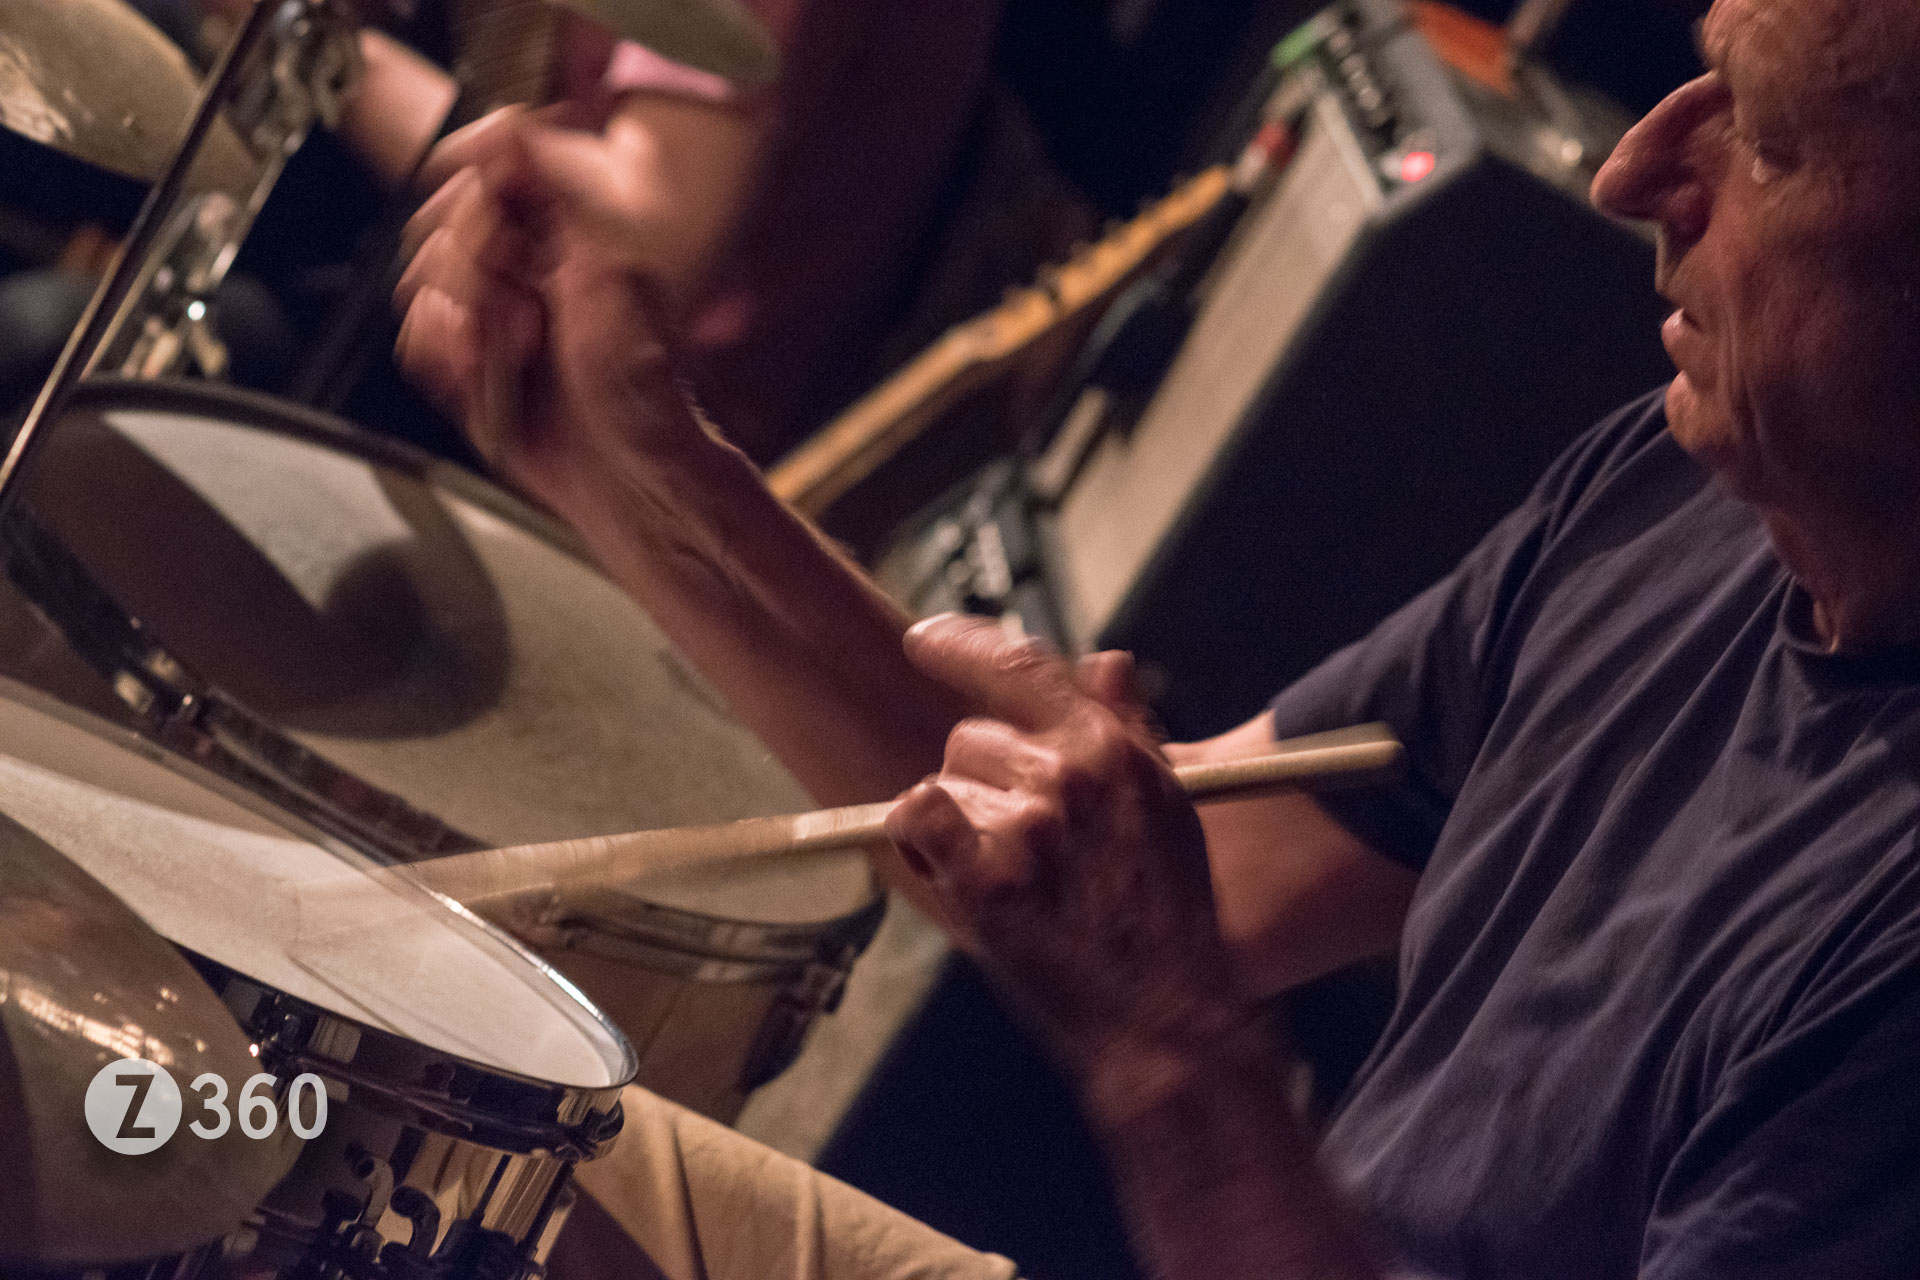 The Founder Effect at Cafe Oto 22/04/18